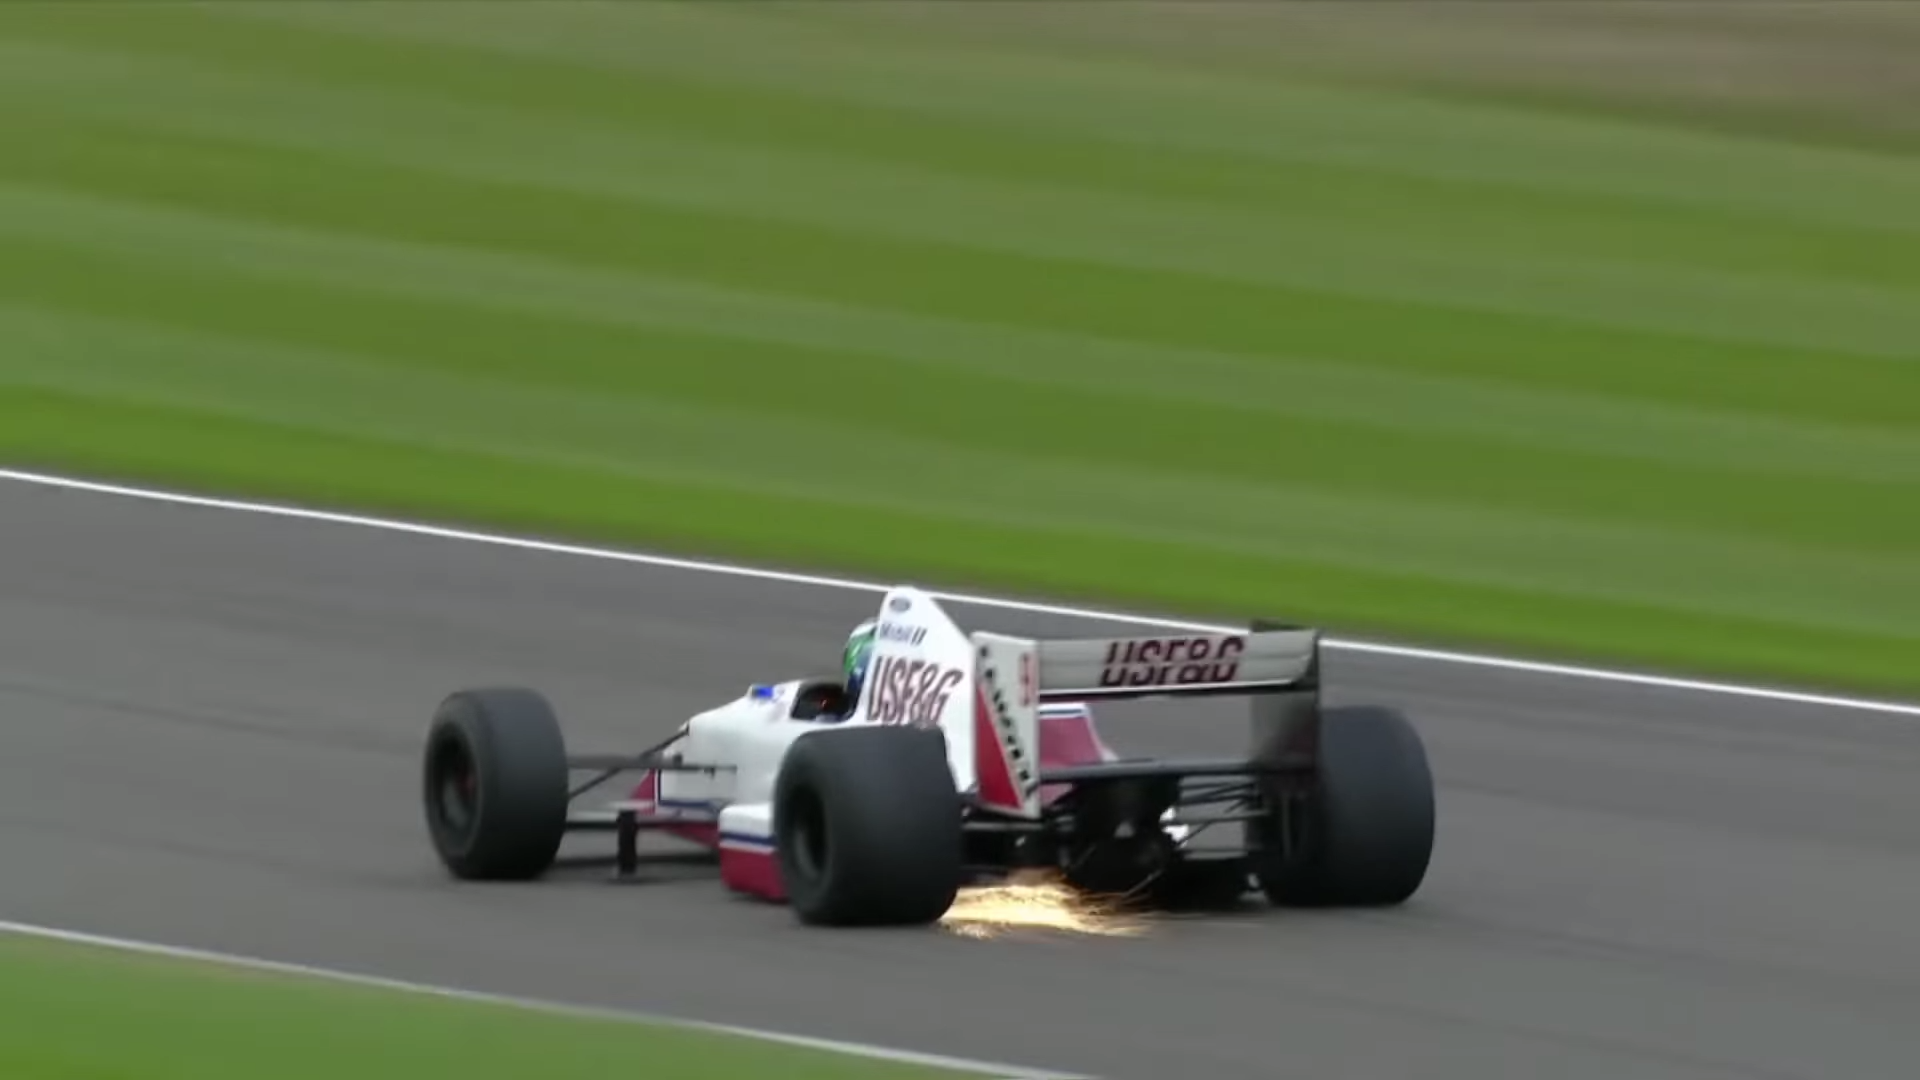 Normally Limited to Parade Laps, Arrow F1 Car Breaks All-Time Goodwood Lap Record